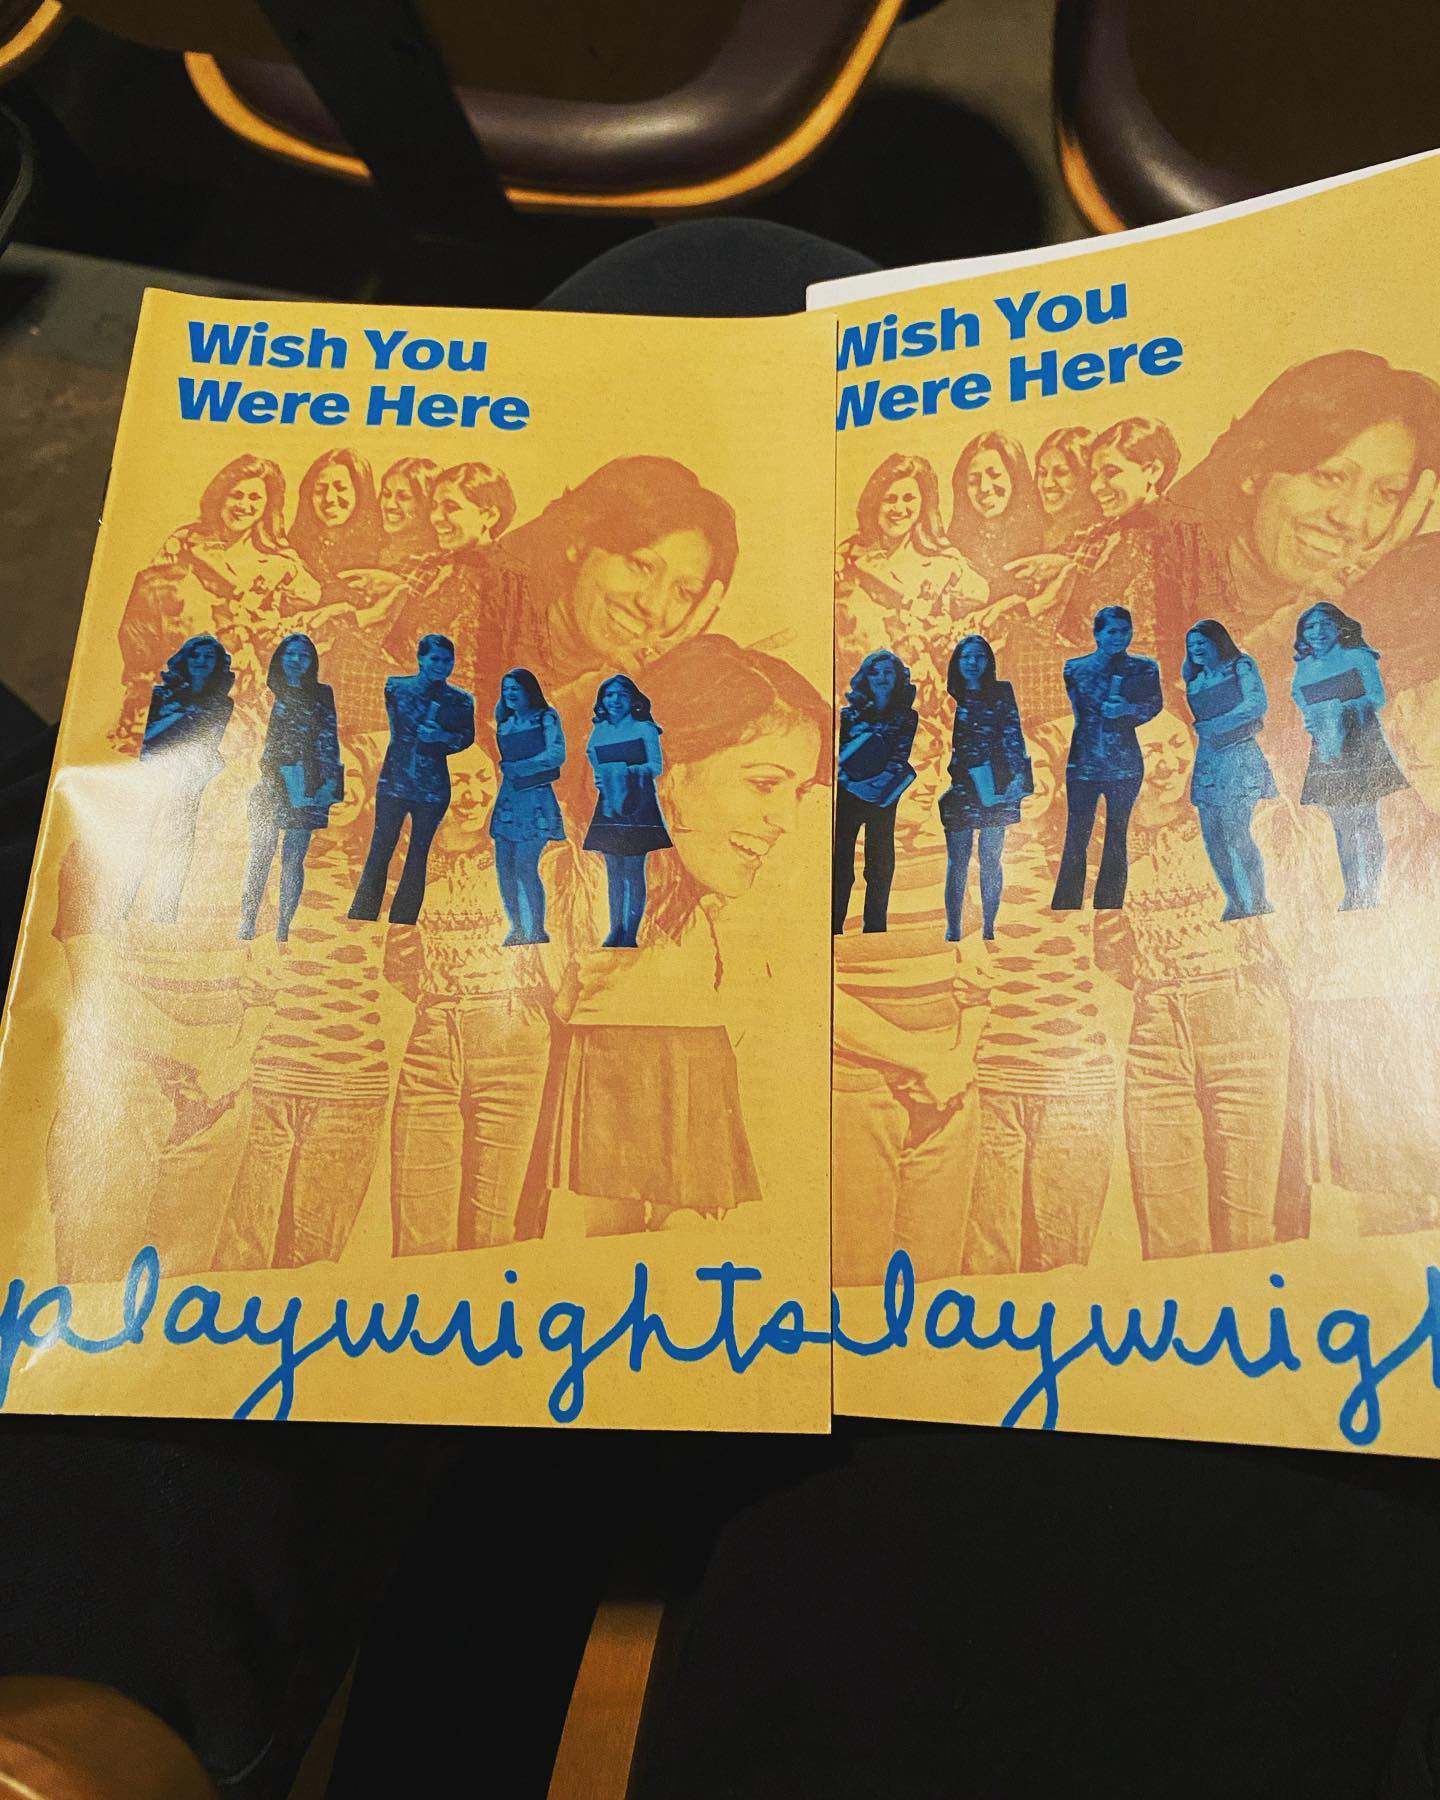 Wish You Were Here was our second @sanaztss play this season (the fabulous English being the first). Jesse and I are officially fans of her work which escalates slowly and penetrates deeply. She writes rich female characters, fully complex. Friendship is at the heart of this play @phnyc I loved it in all of its sass and delicacy. #offbroadway #offbroadwayplay #sanaztoossi #playwrightshorizons #saturdaymatinee #nyctheatre #playwrighting #theatre #theatrelover